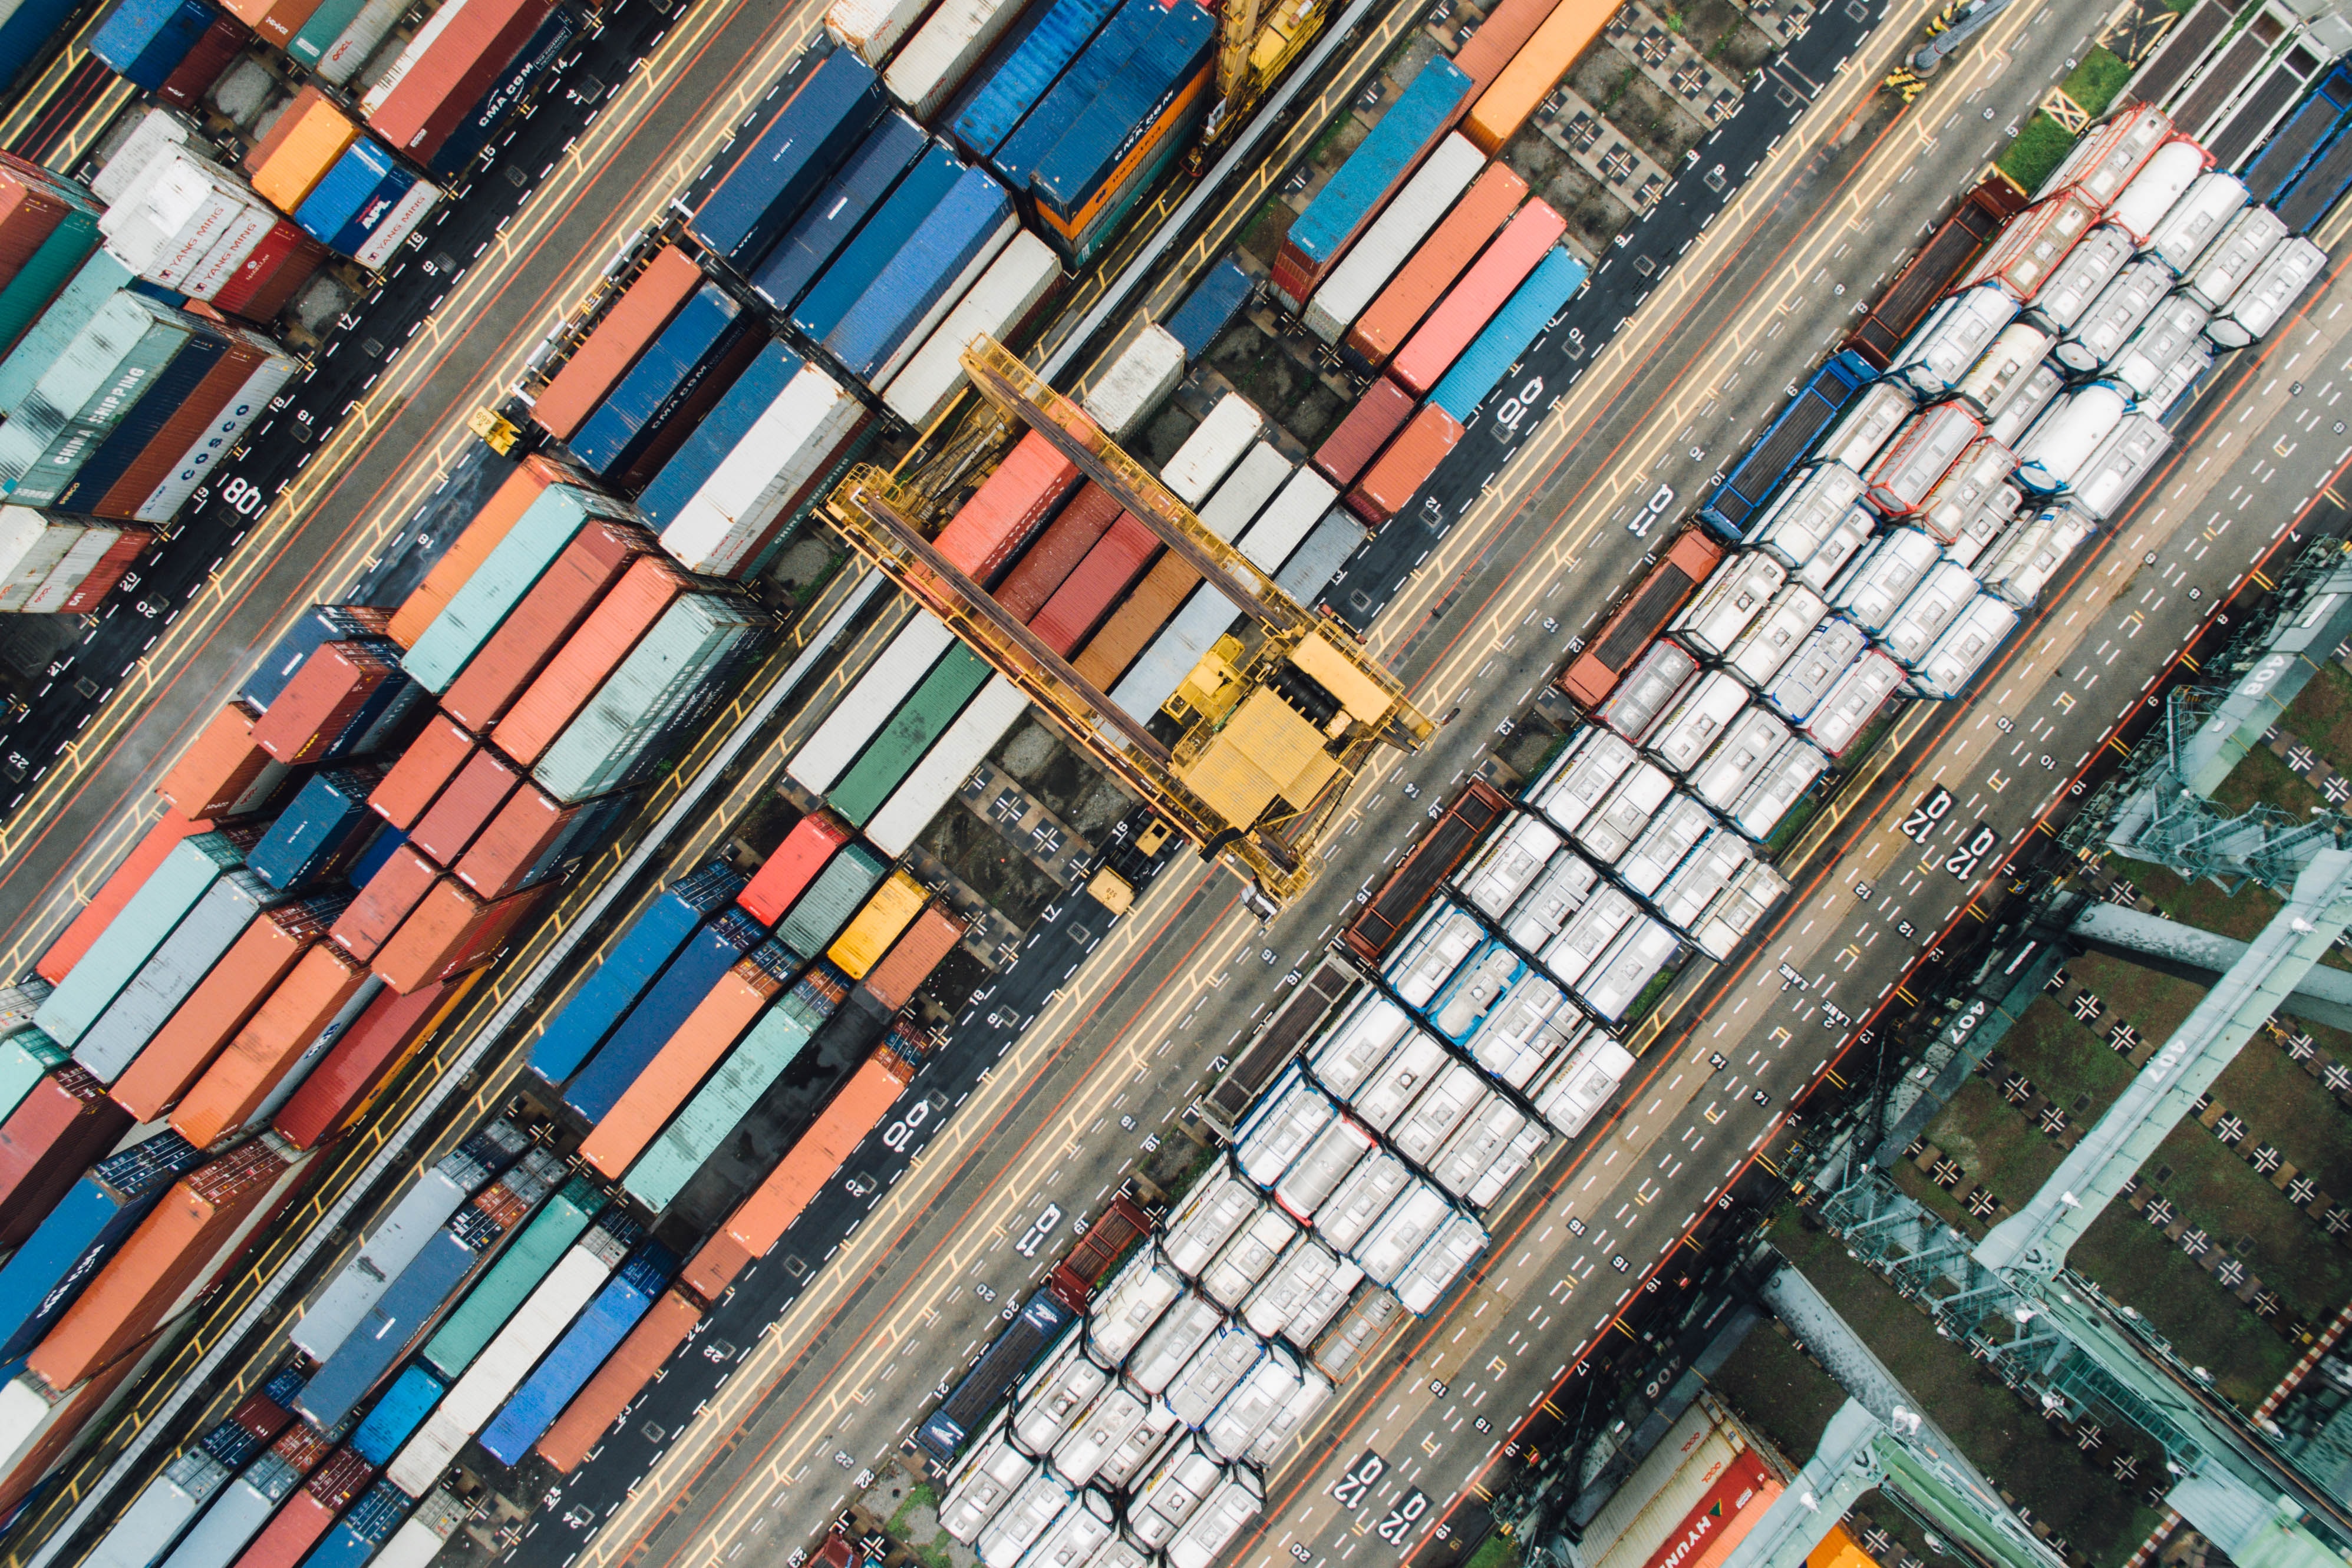 Birds eye view over different sized and colored shipping containers